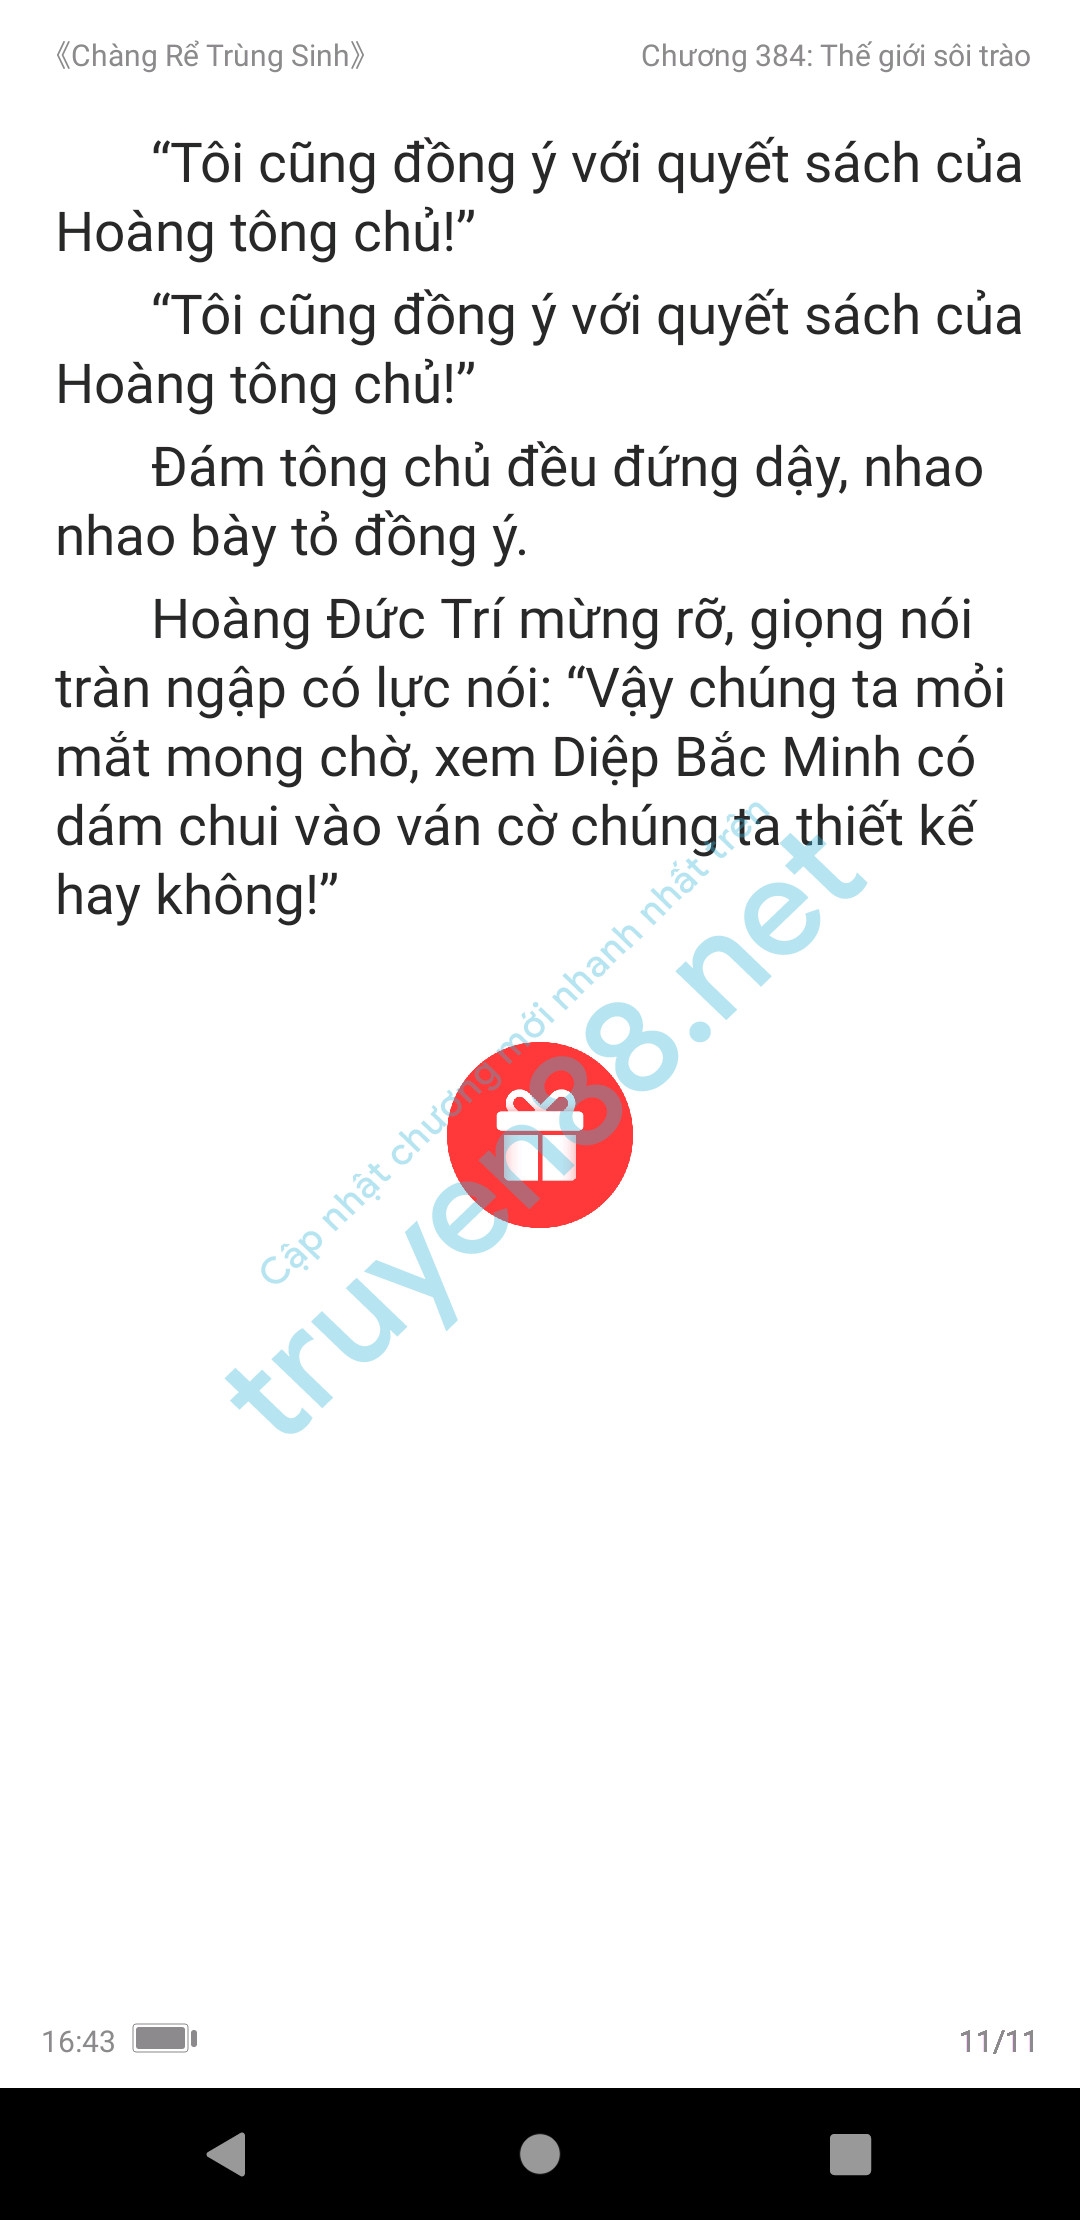 chang-re-trung-sinh-384-1